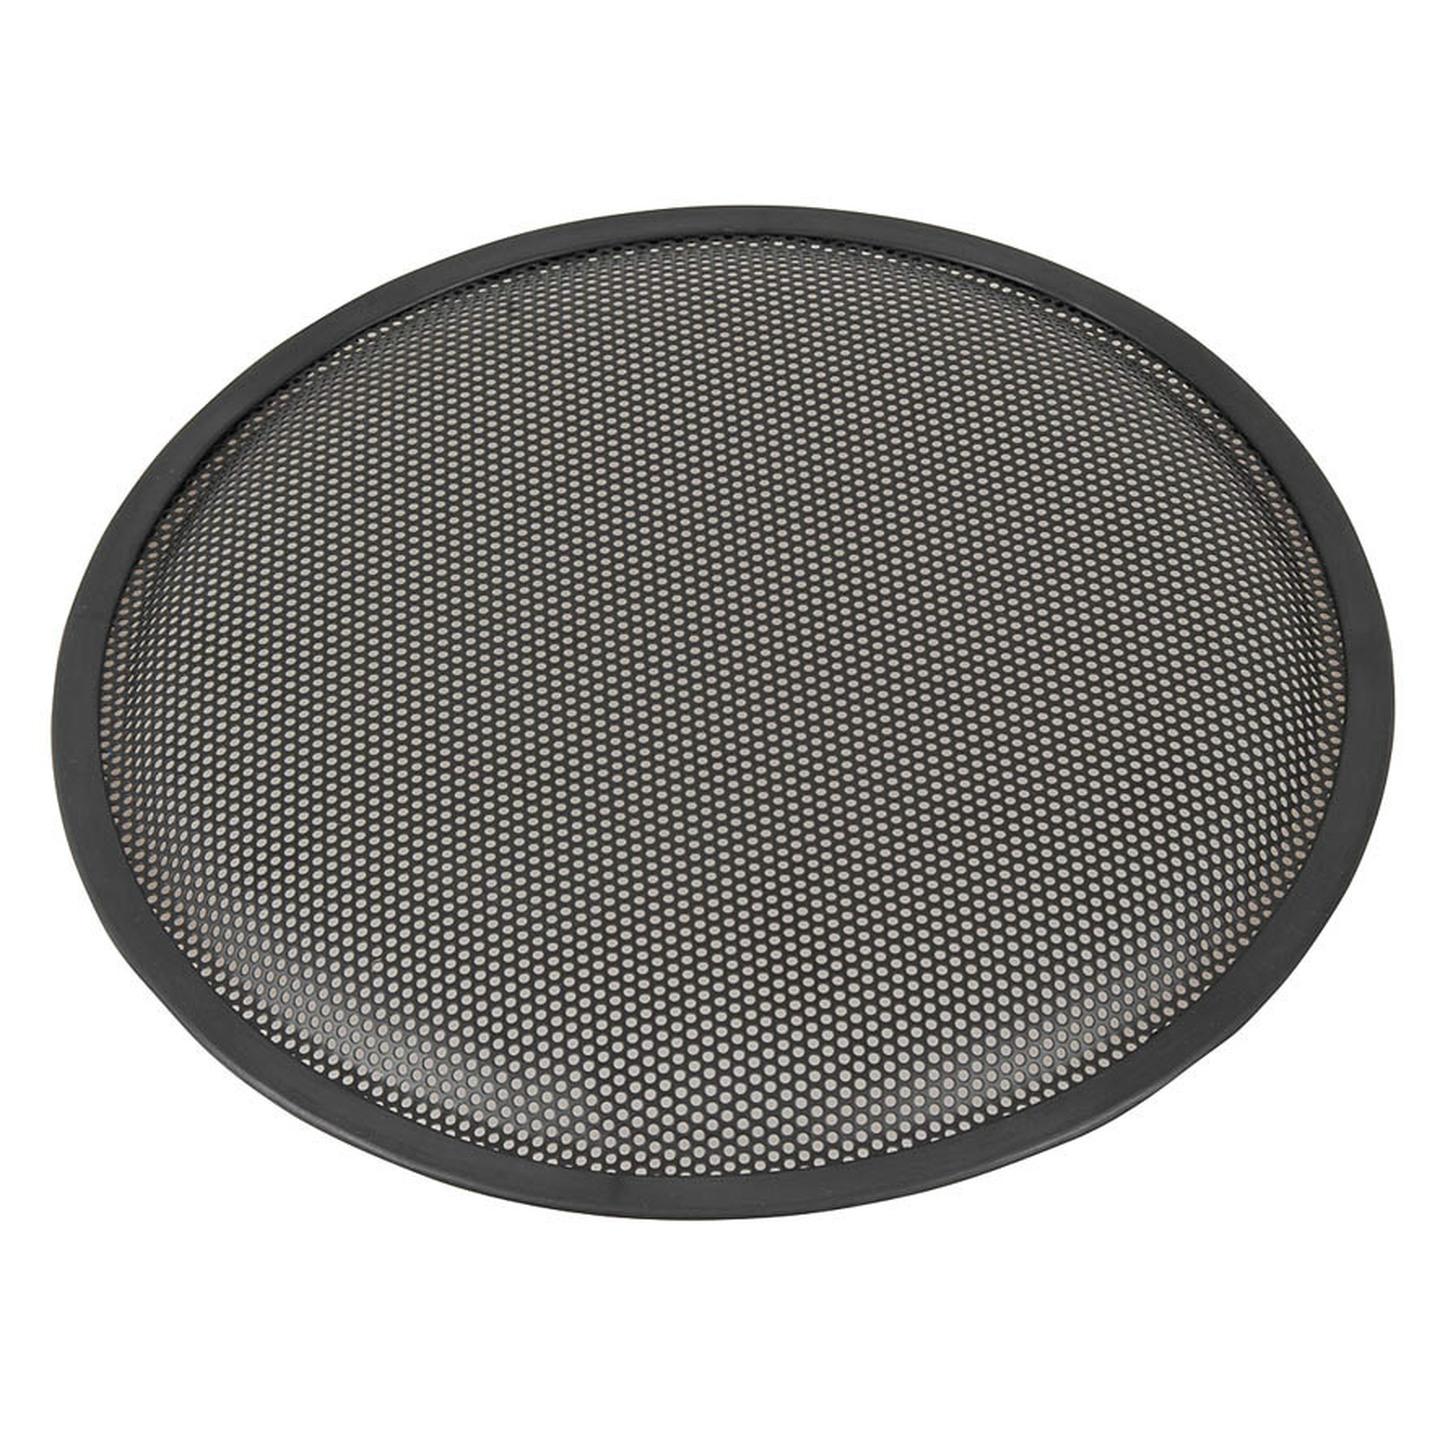 10 Speaker Protection Grille with Clips